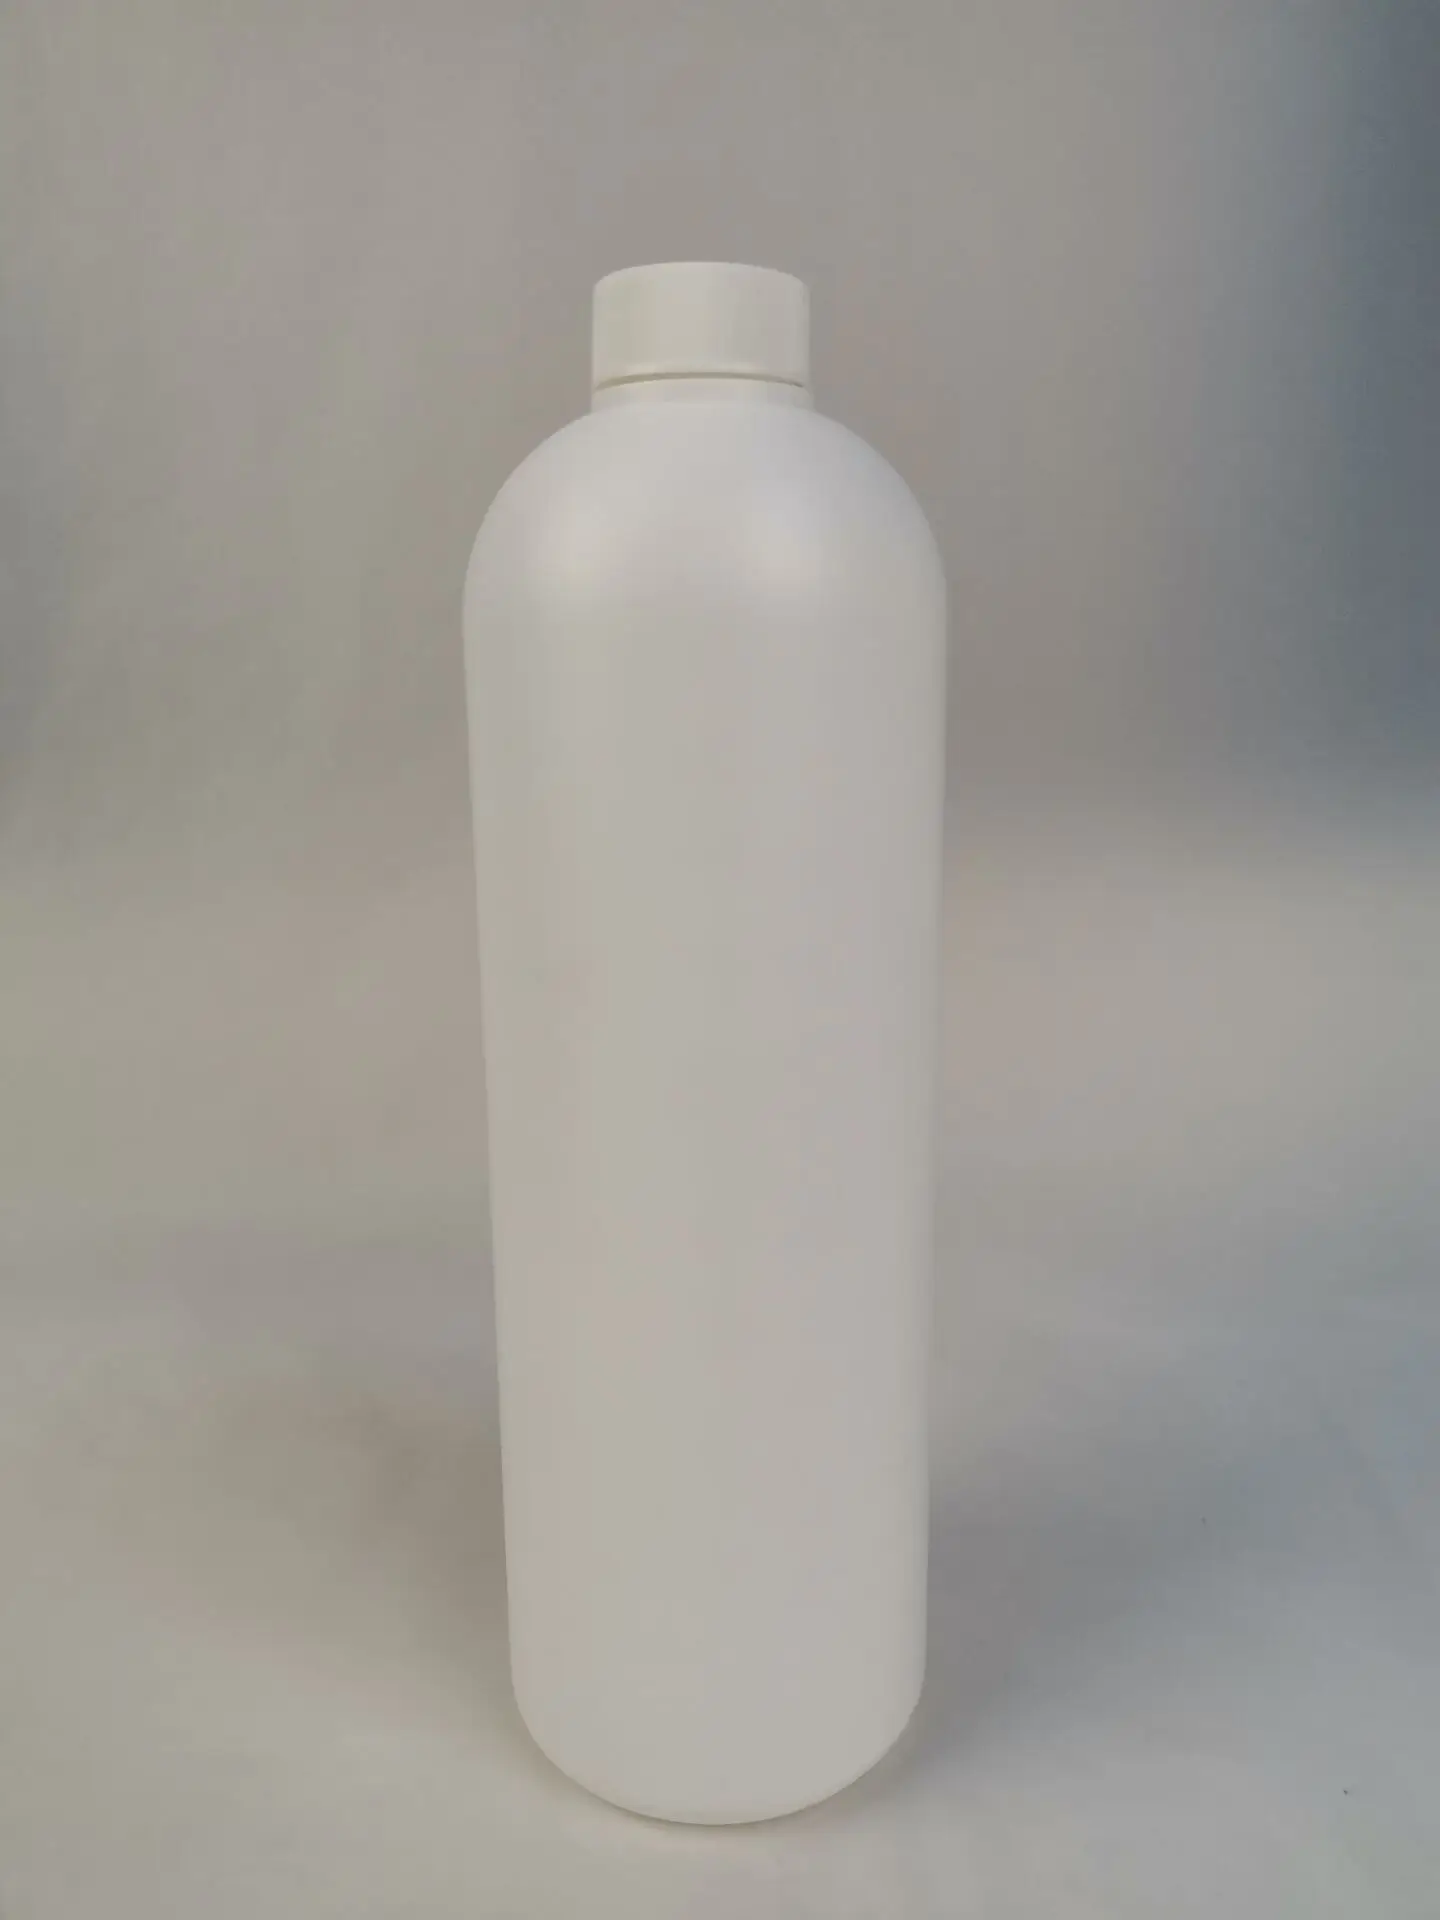 16oz HDPE Durable Squeezable Plastic Bottles with Black Press Disc Top Cap Natural Clear Container